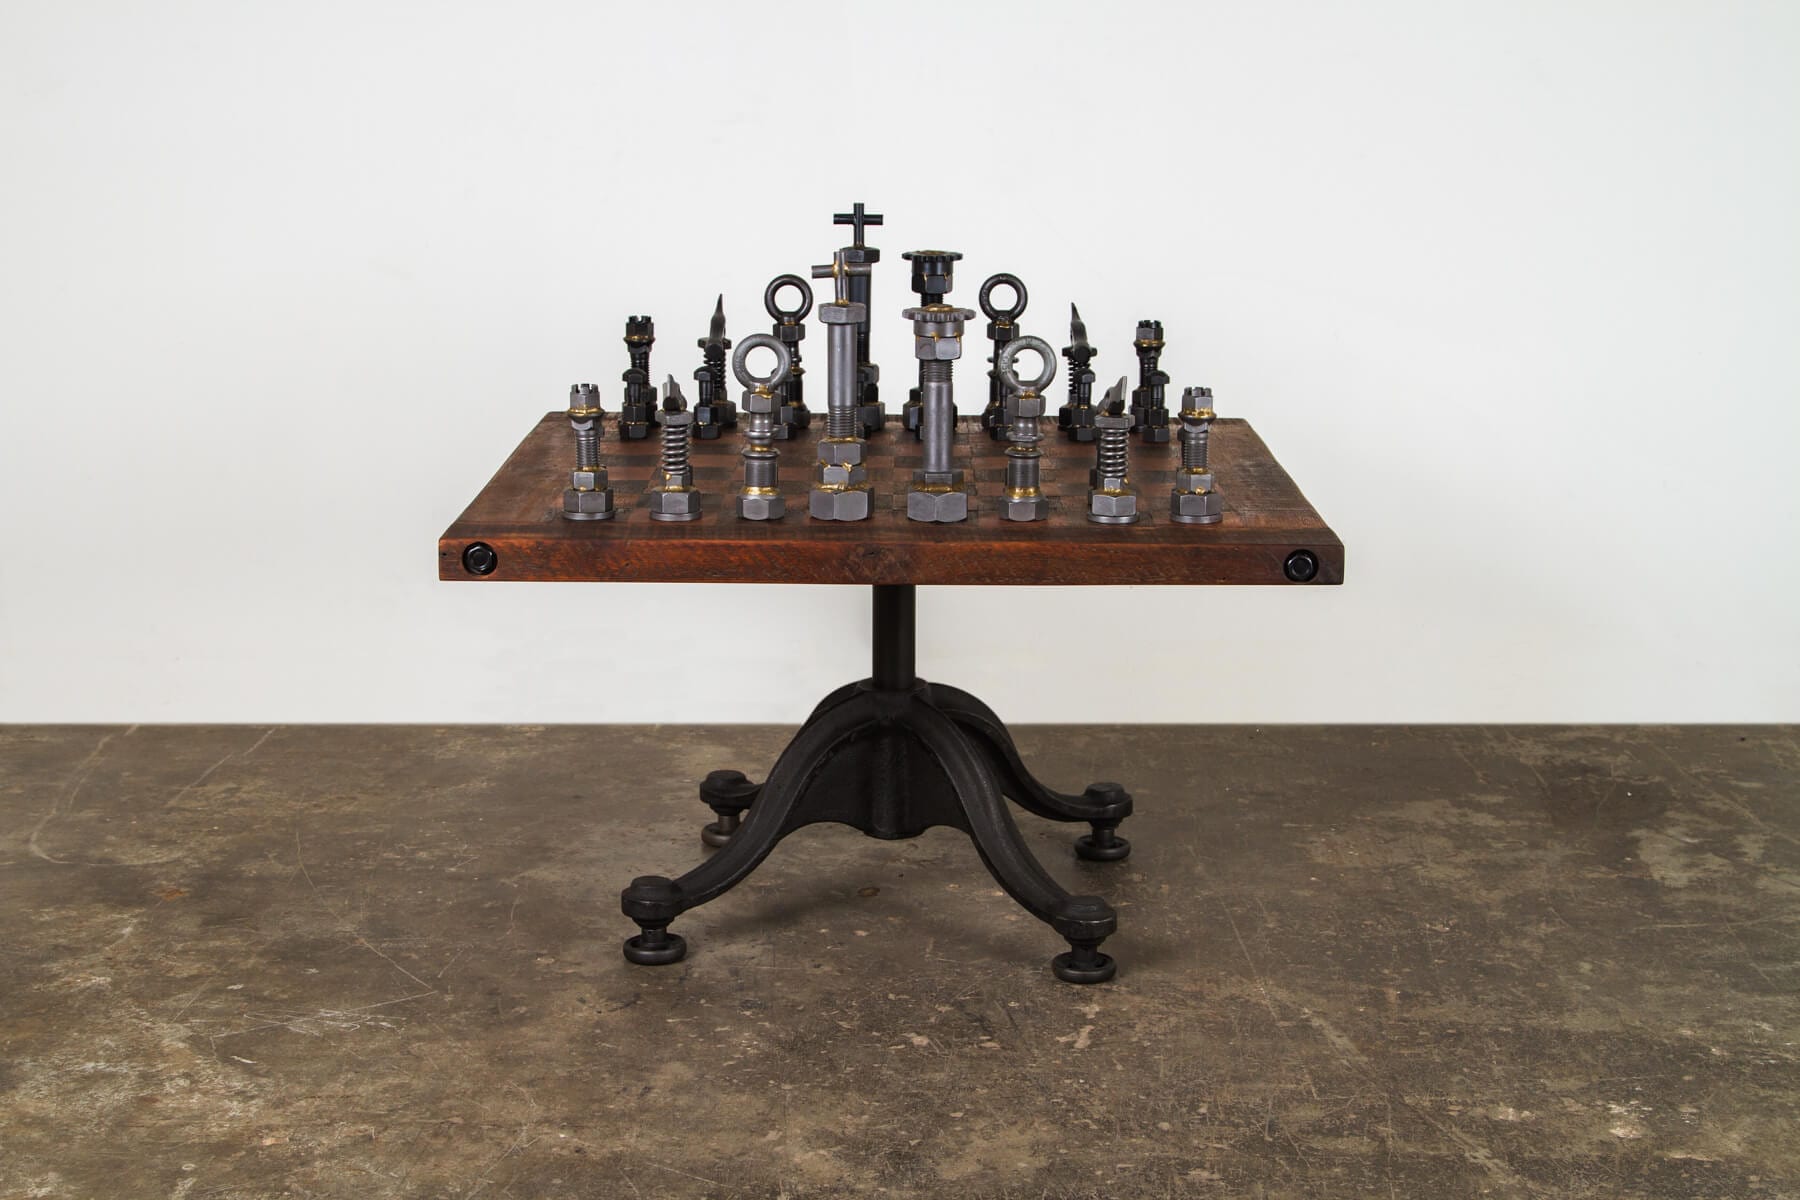 Chessboard Table